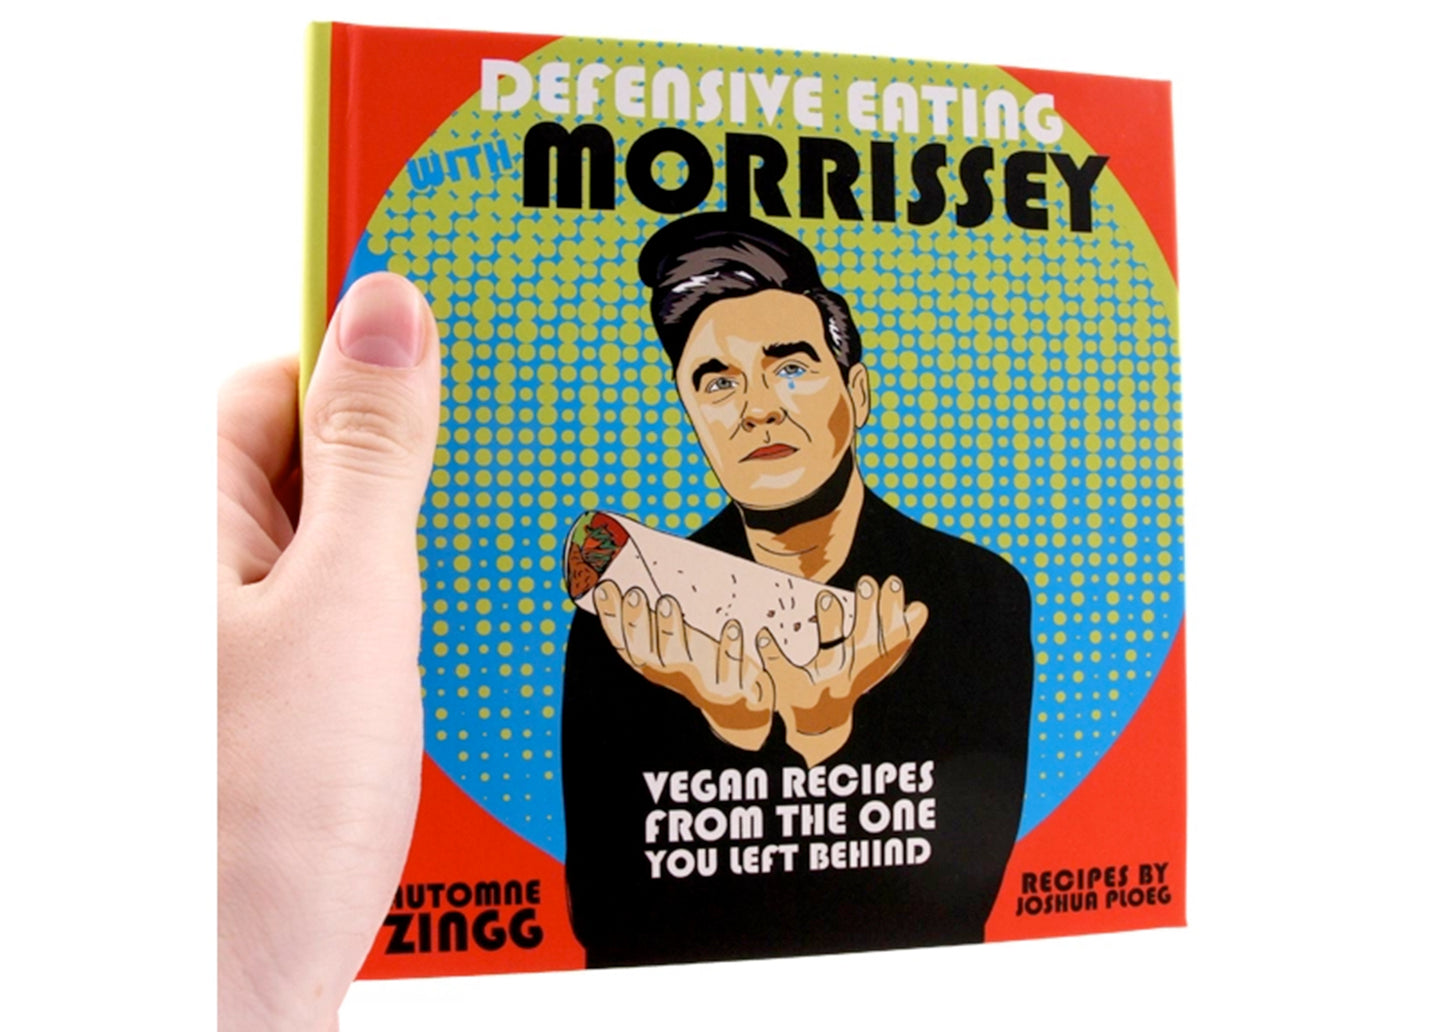 Defensive Eating With Morrissey: Vegan Recipes From The One You Left Behind Book